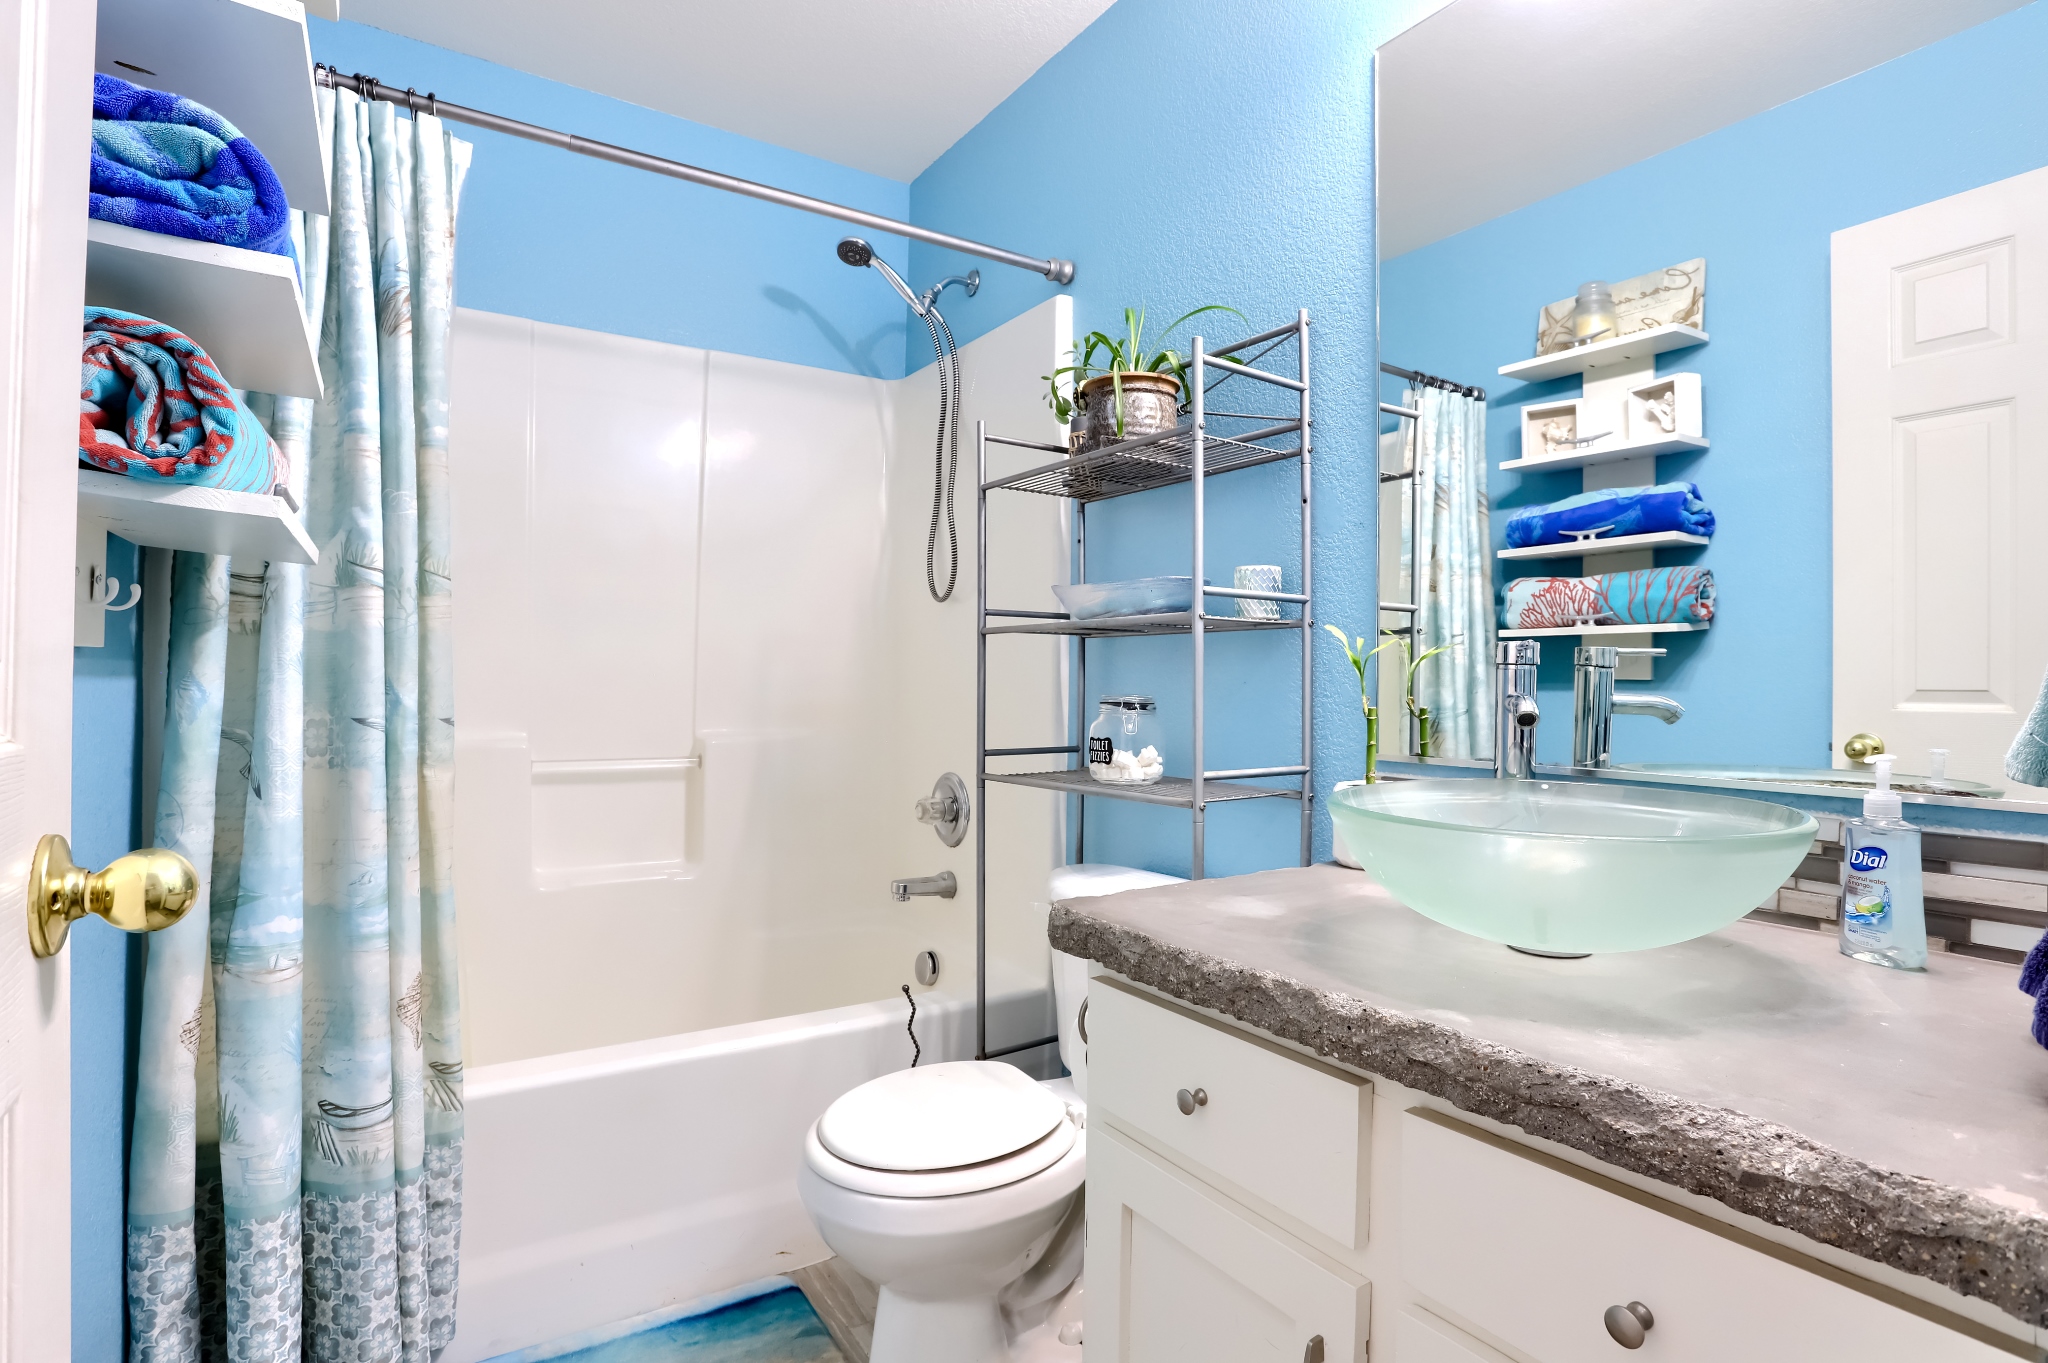 REAL ESTATE LISTING: 3011 45th Ave Greeley Shared Bath